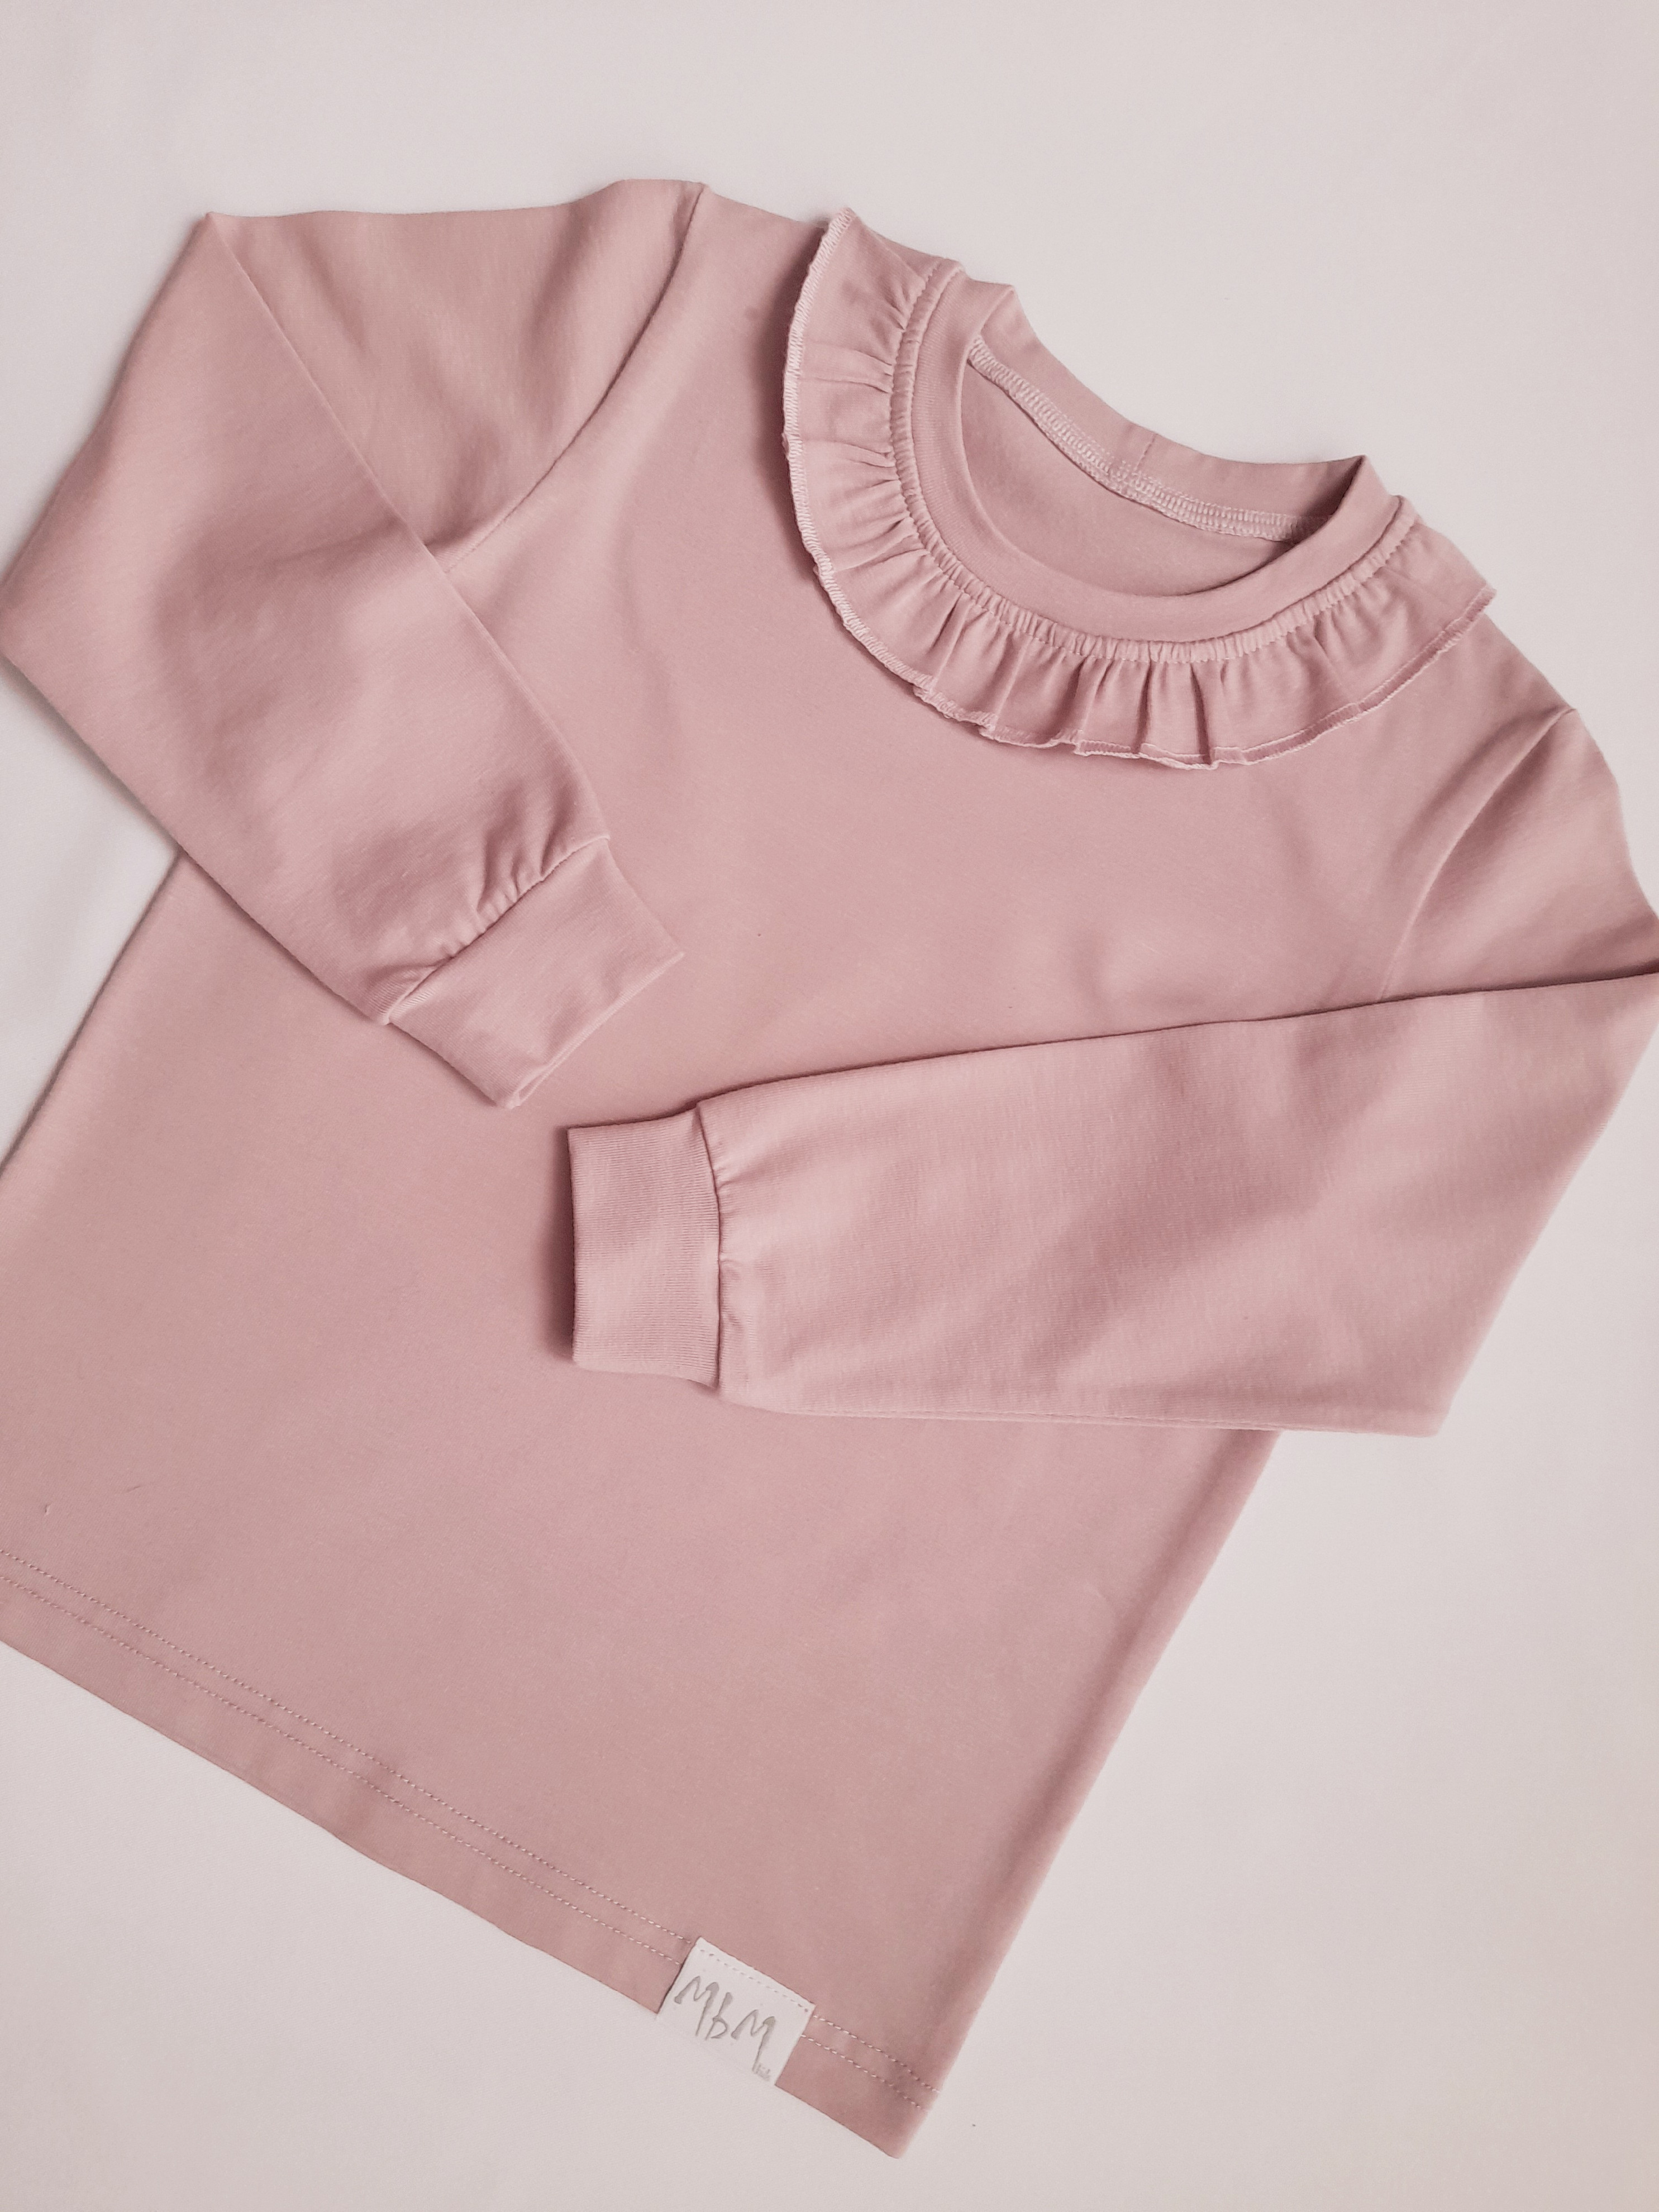 CHILD T-SHIRT DUSTY PINK Velikost: 122